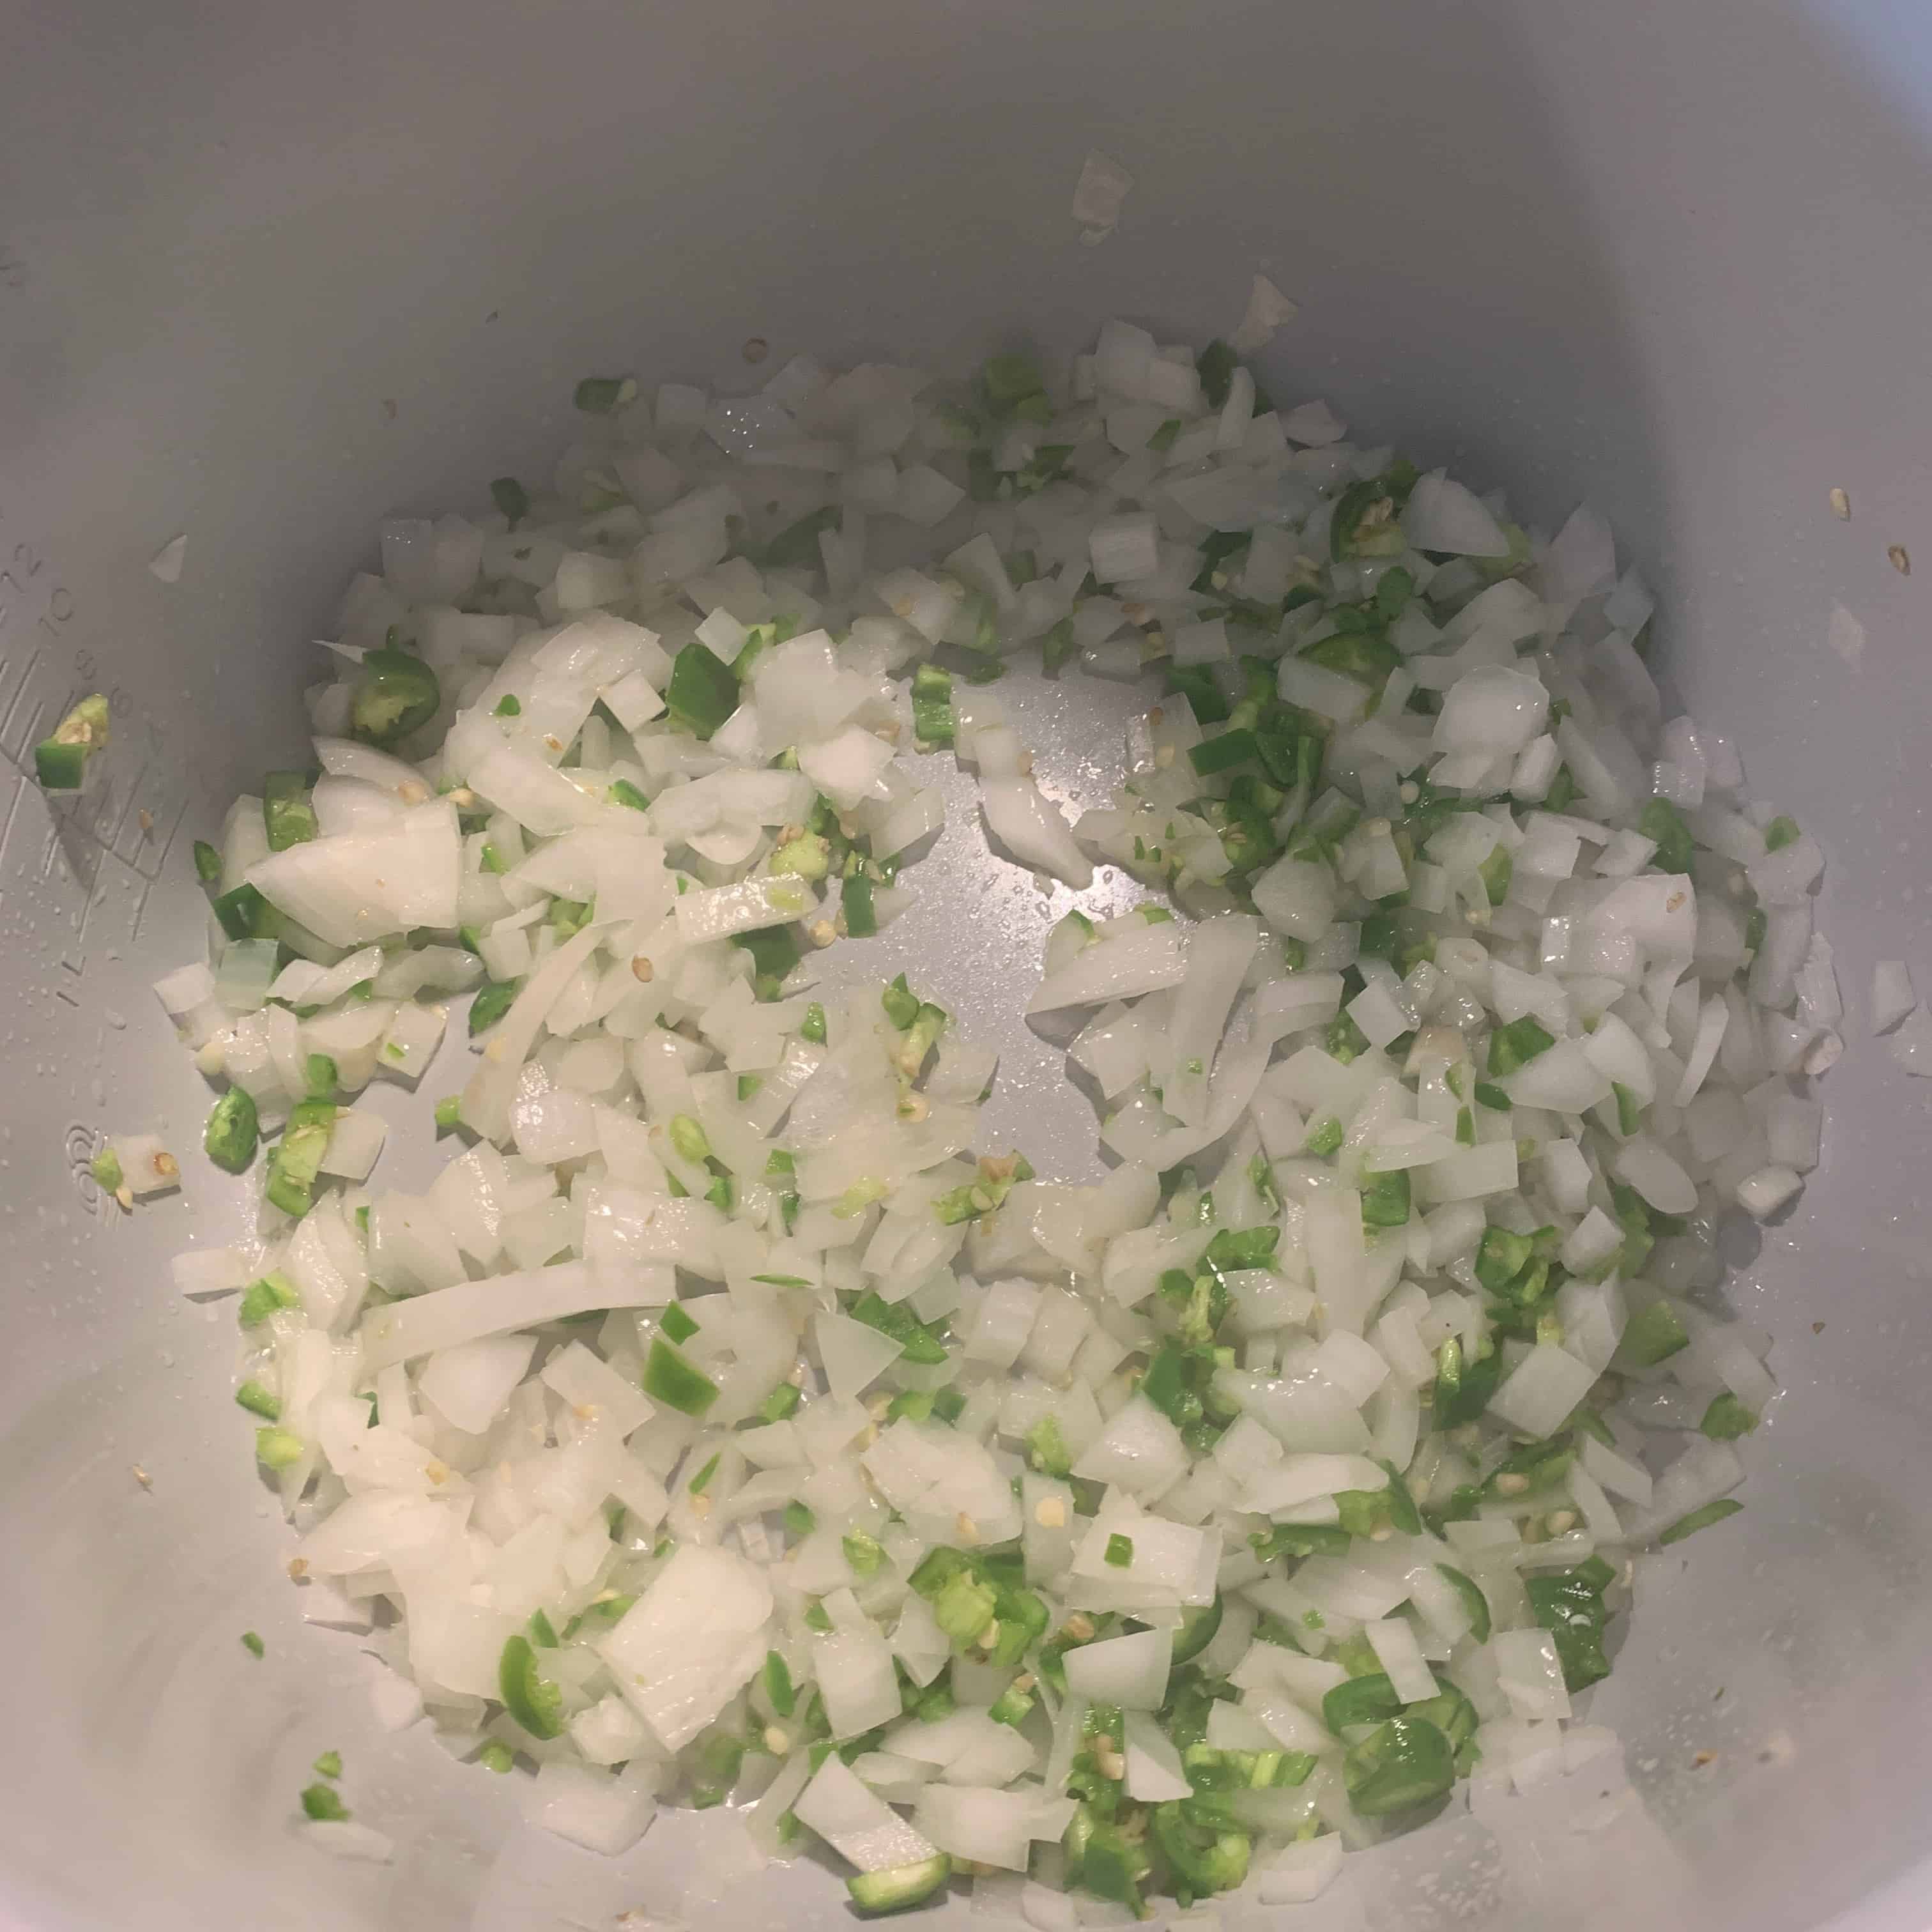 onions and serrano peppers in the pot